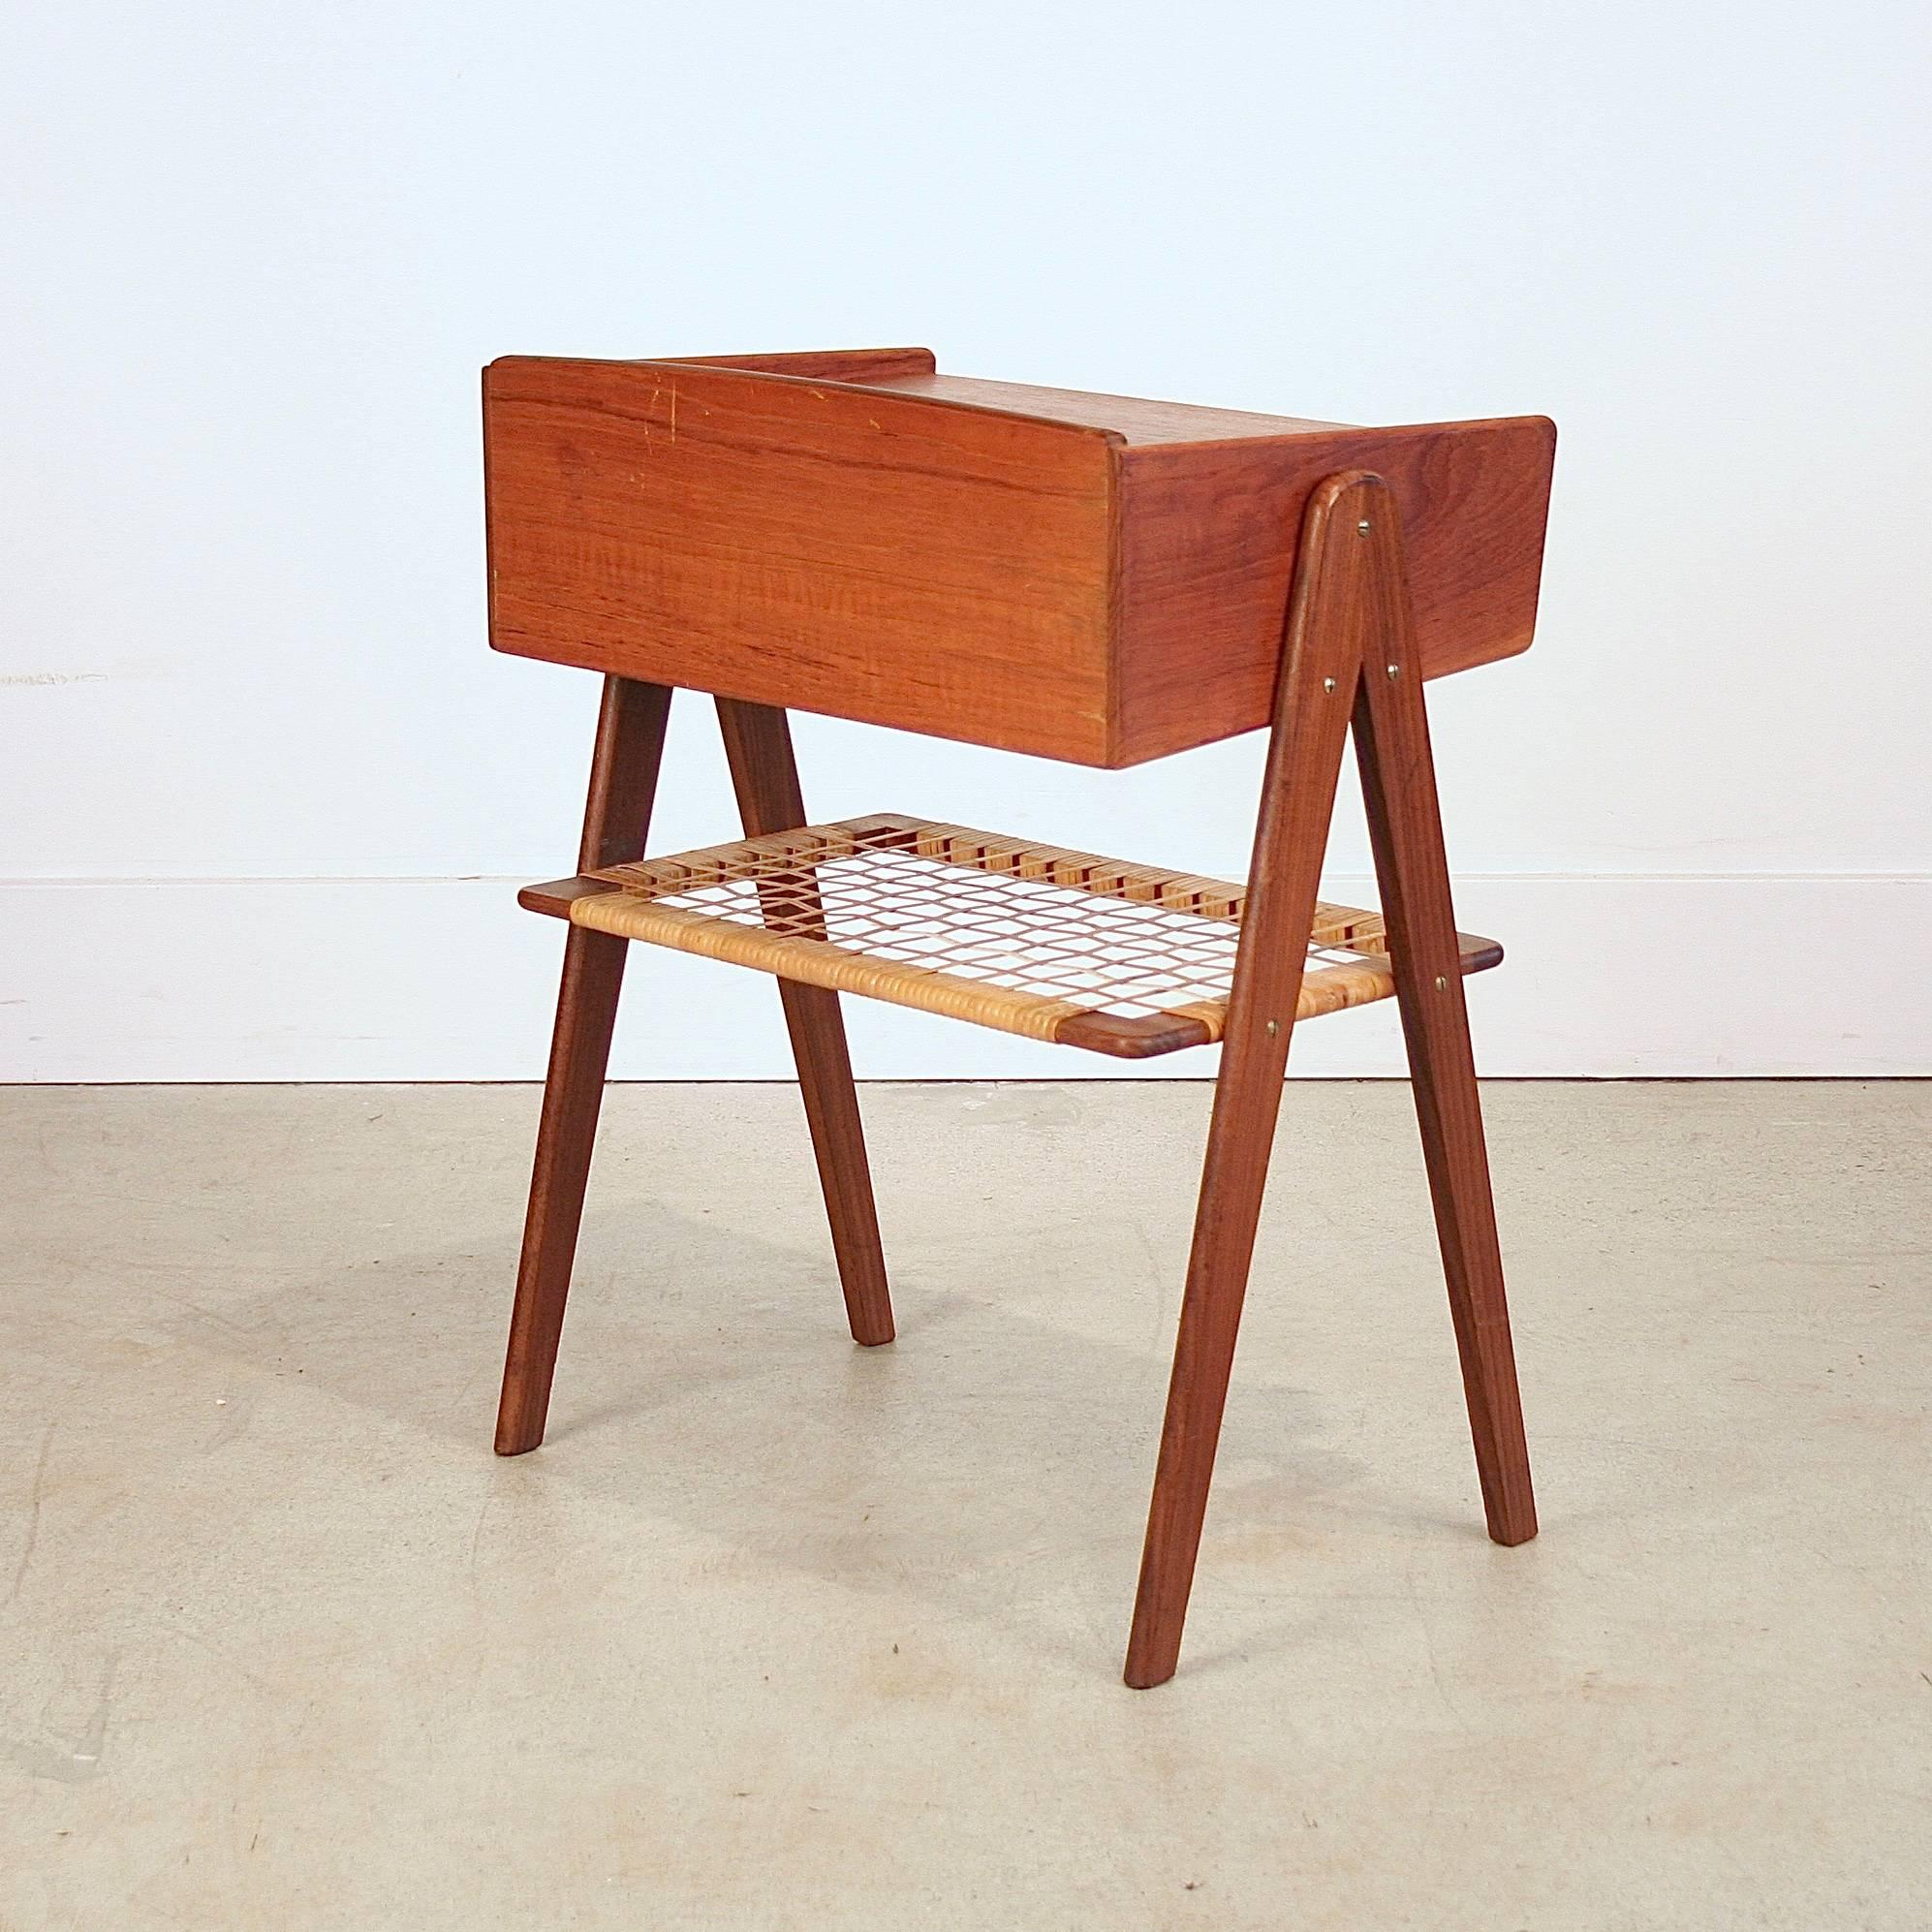 Vintage Danish Teak Side Table with Cane Shelf In Excellent Condition For Sale In Vancouver, BC